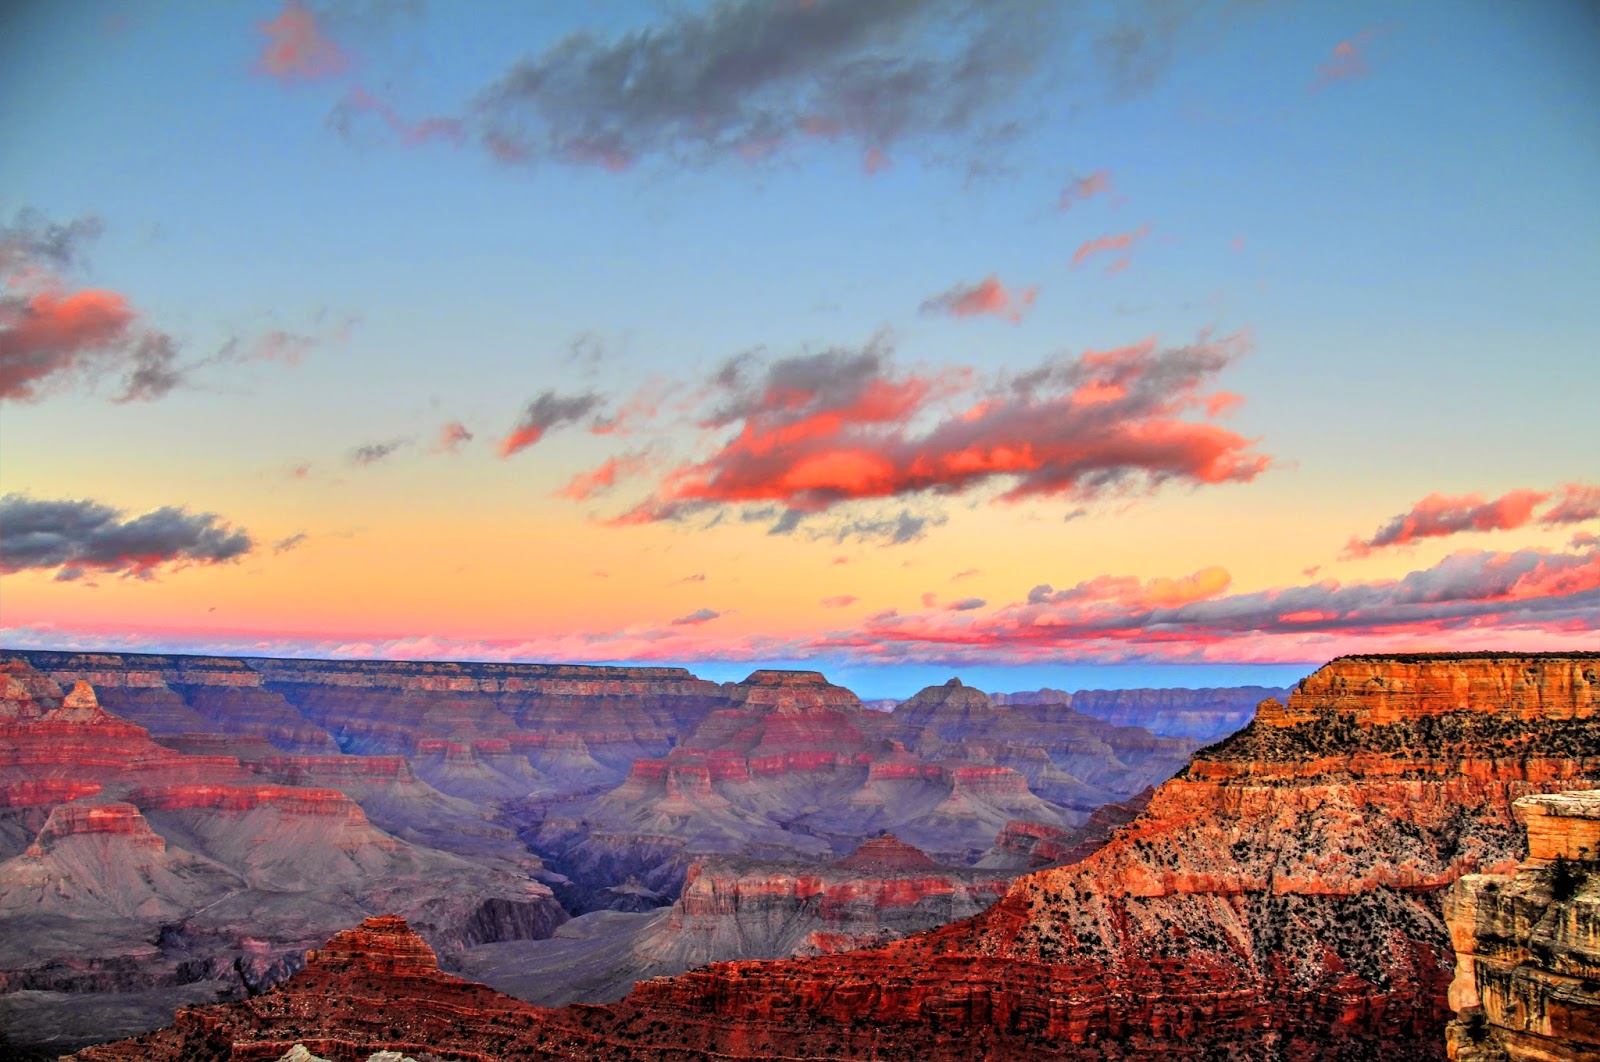 Sociolatte: Sunrise and Sunset over the Grand Canyon [Images]